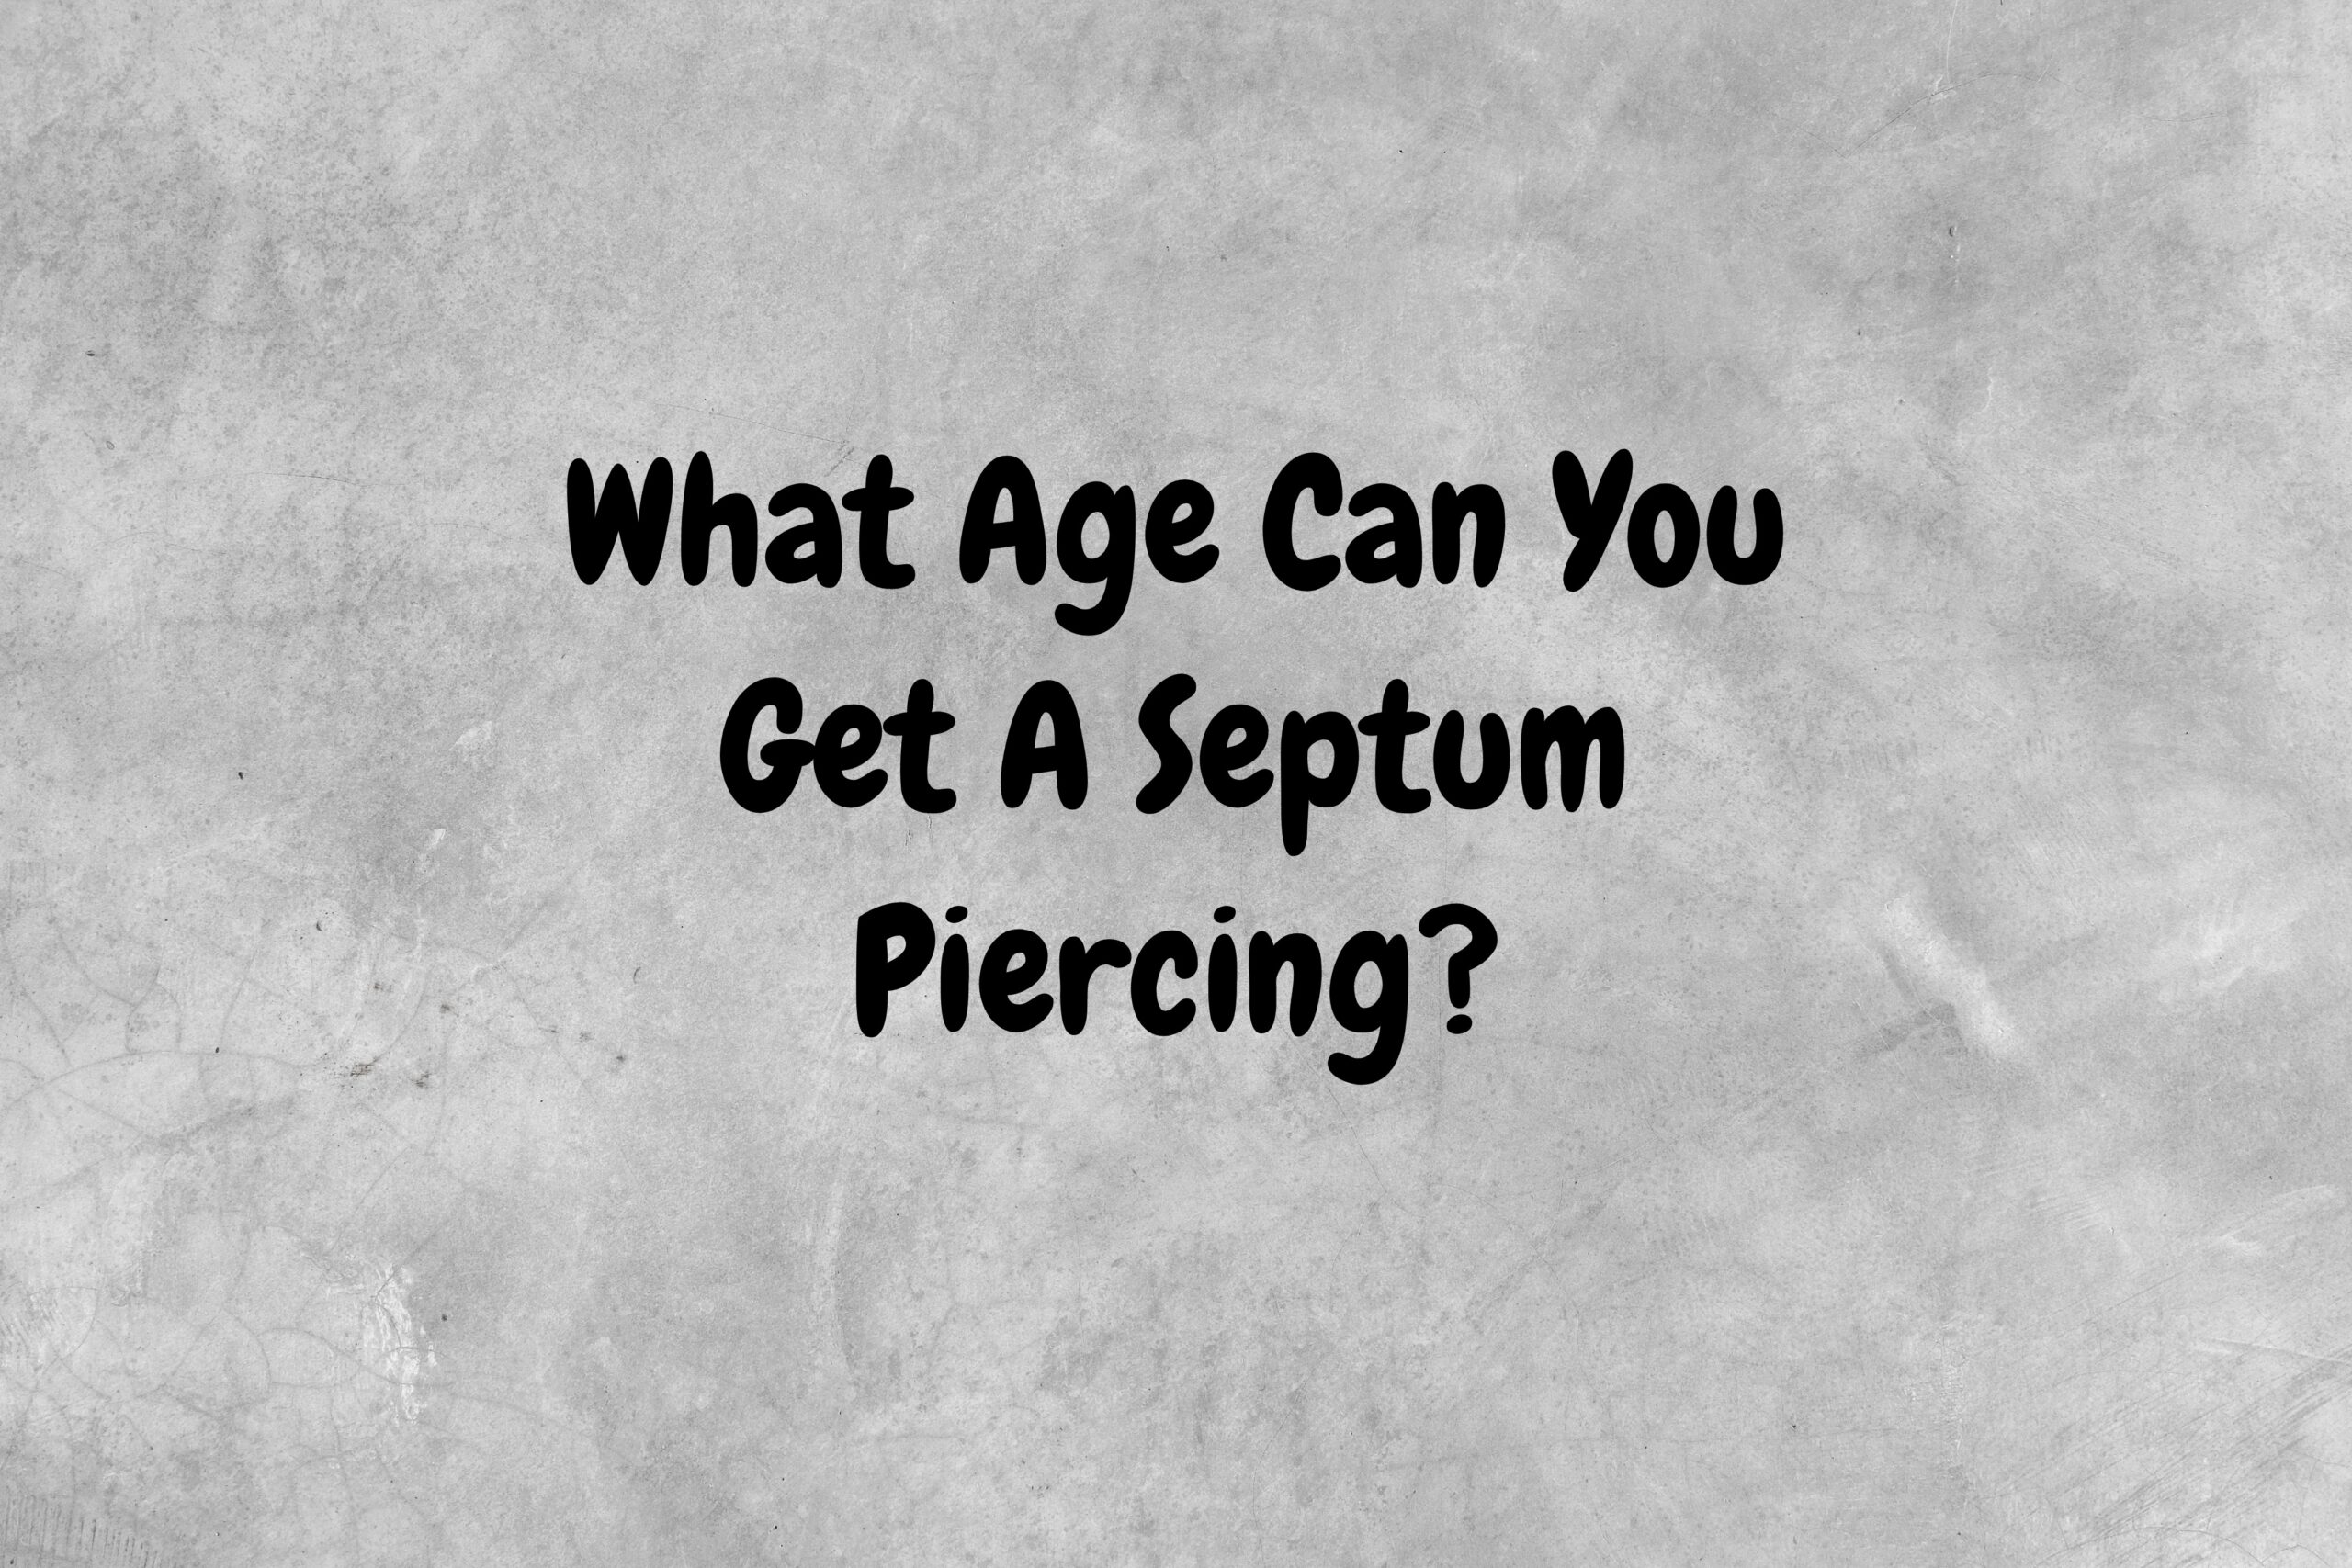 An image with a gray background with black text asking the question, "What age can you get a septum piercing?"